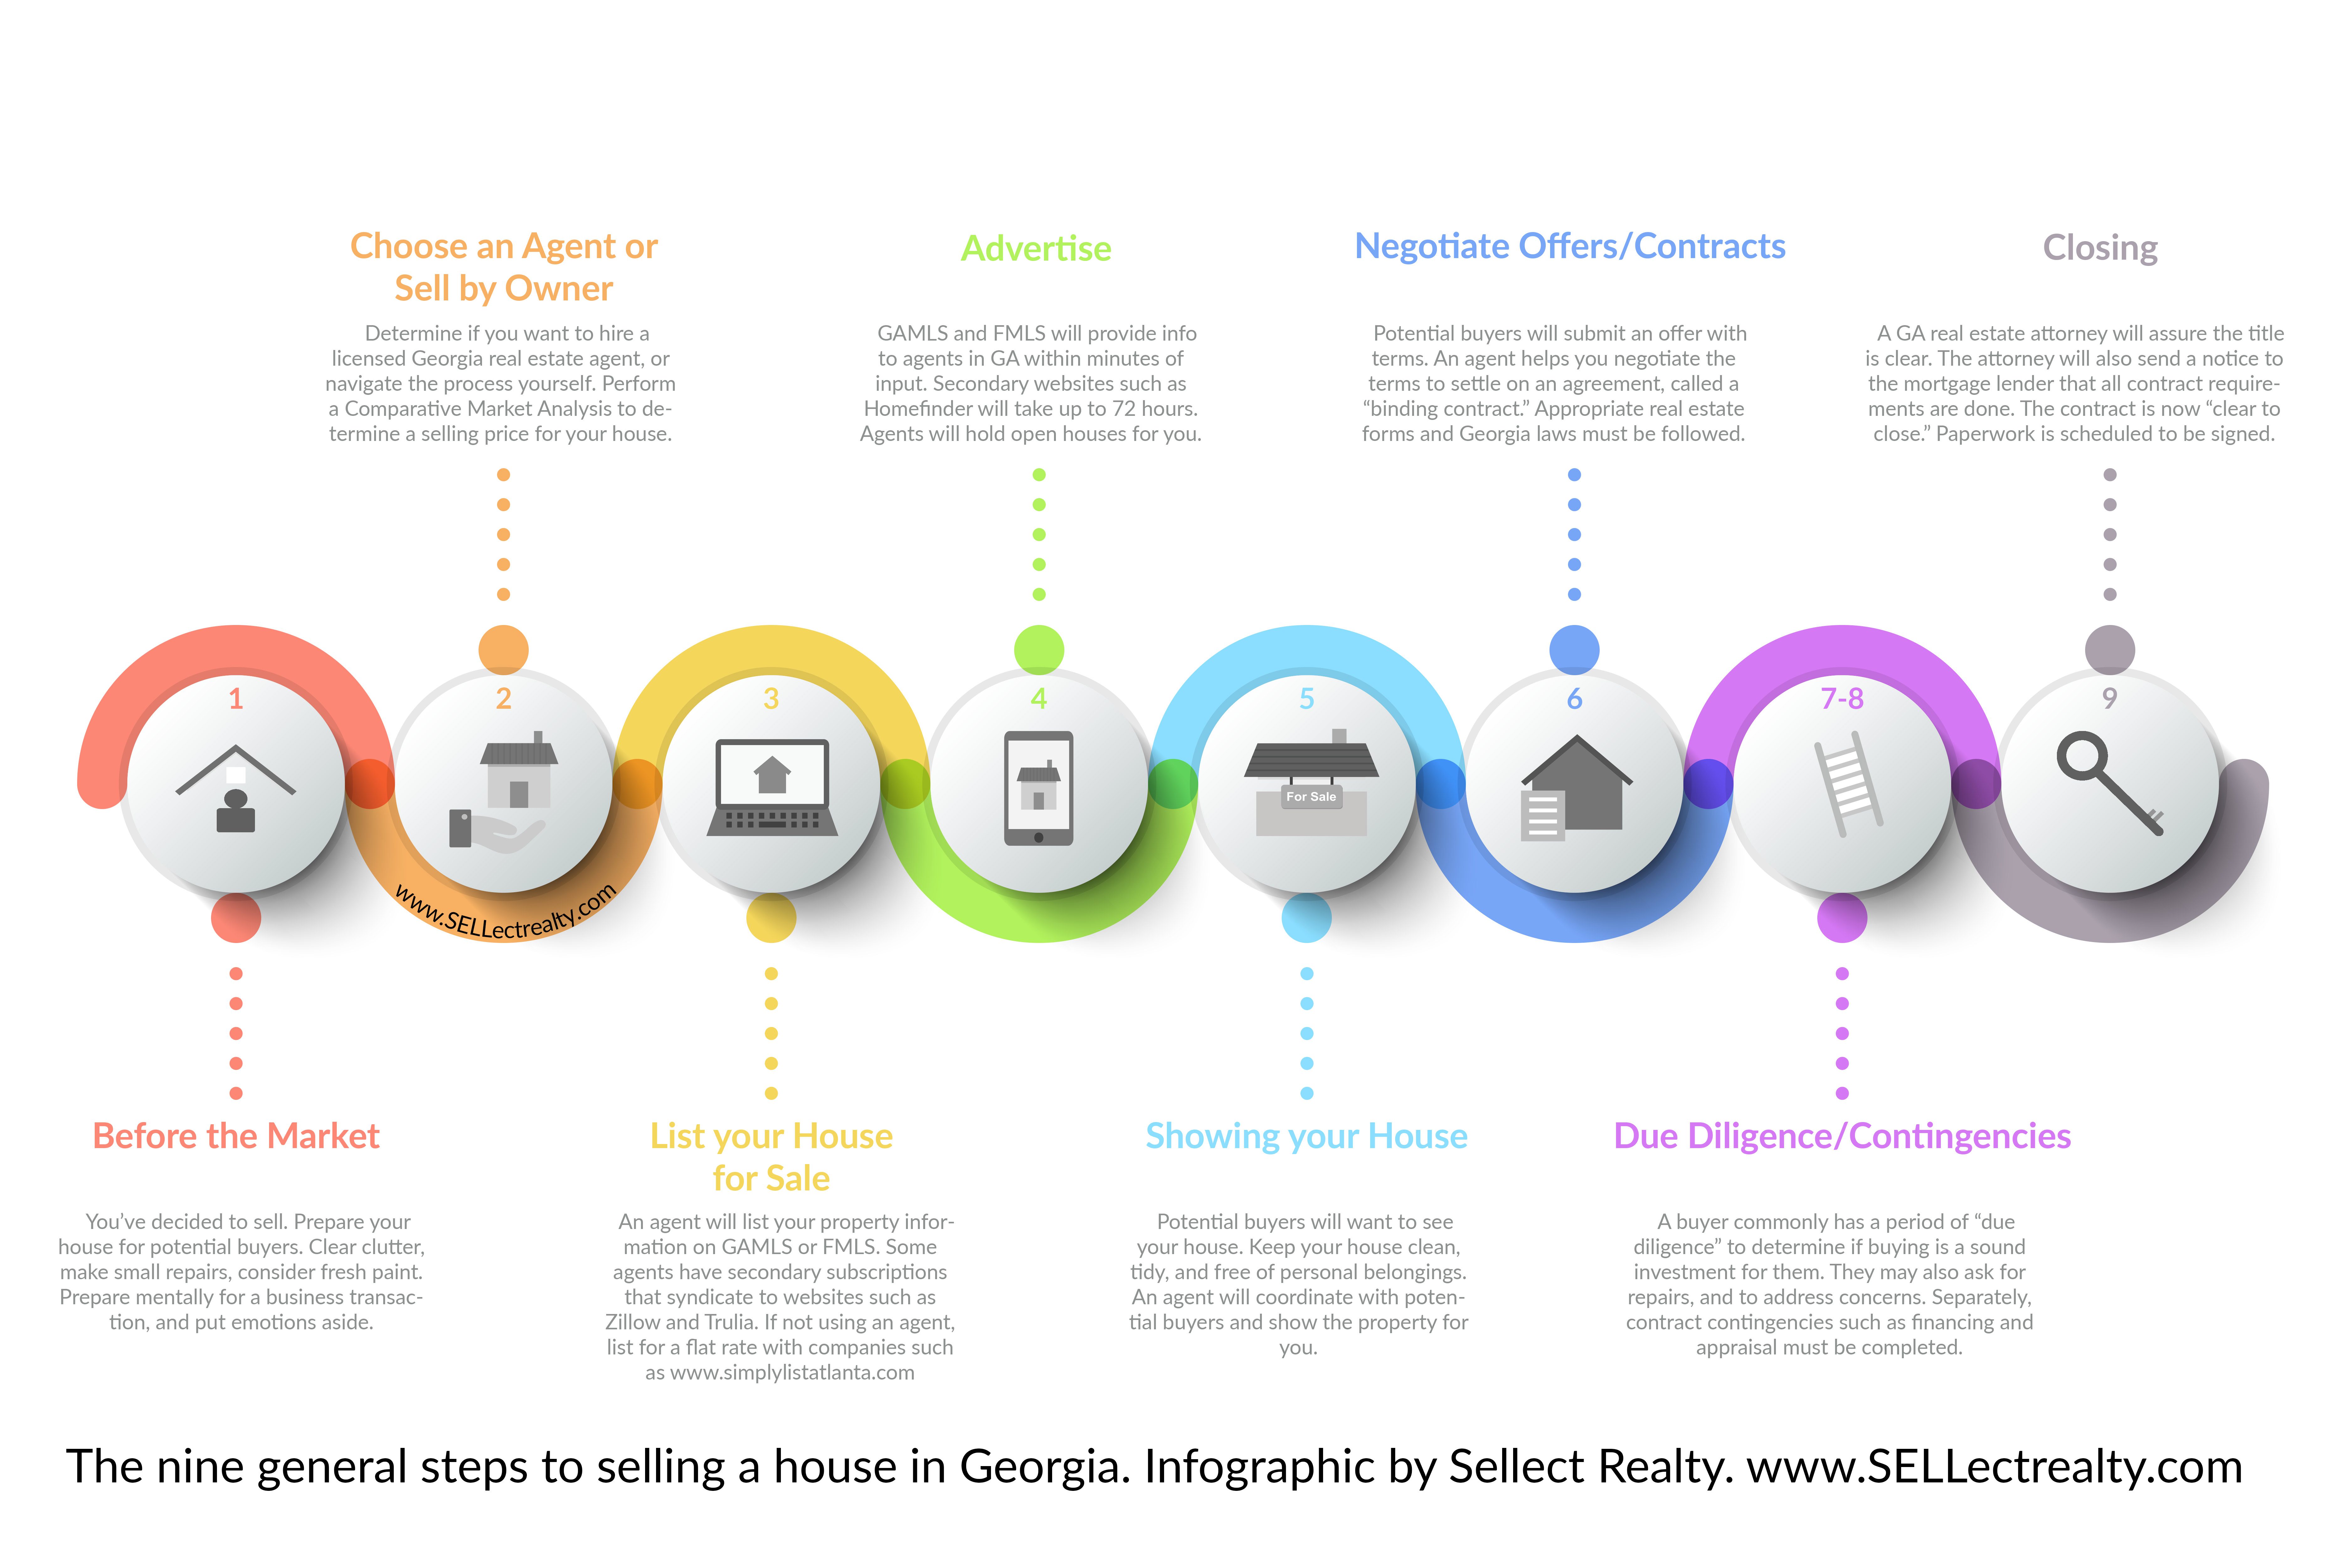 Infographic of the nine general steps to selling a house in Georgia with or without the Georgia MLS